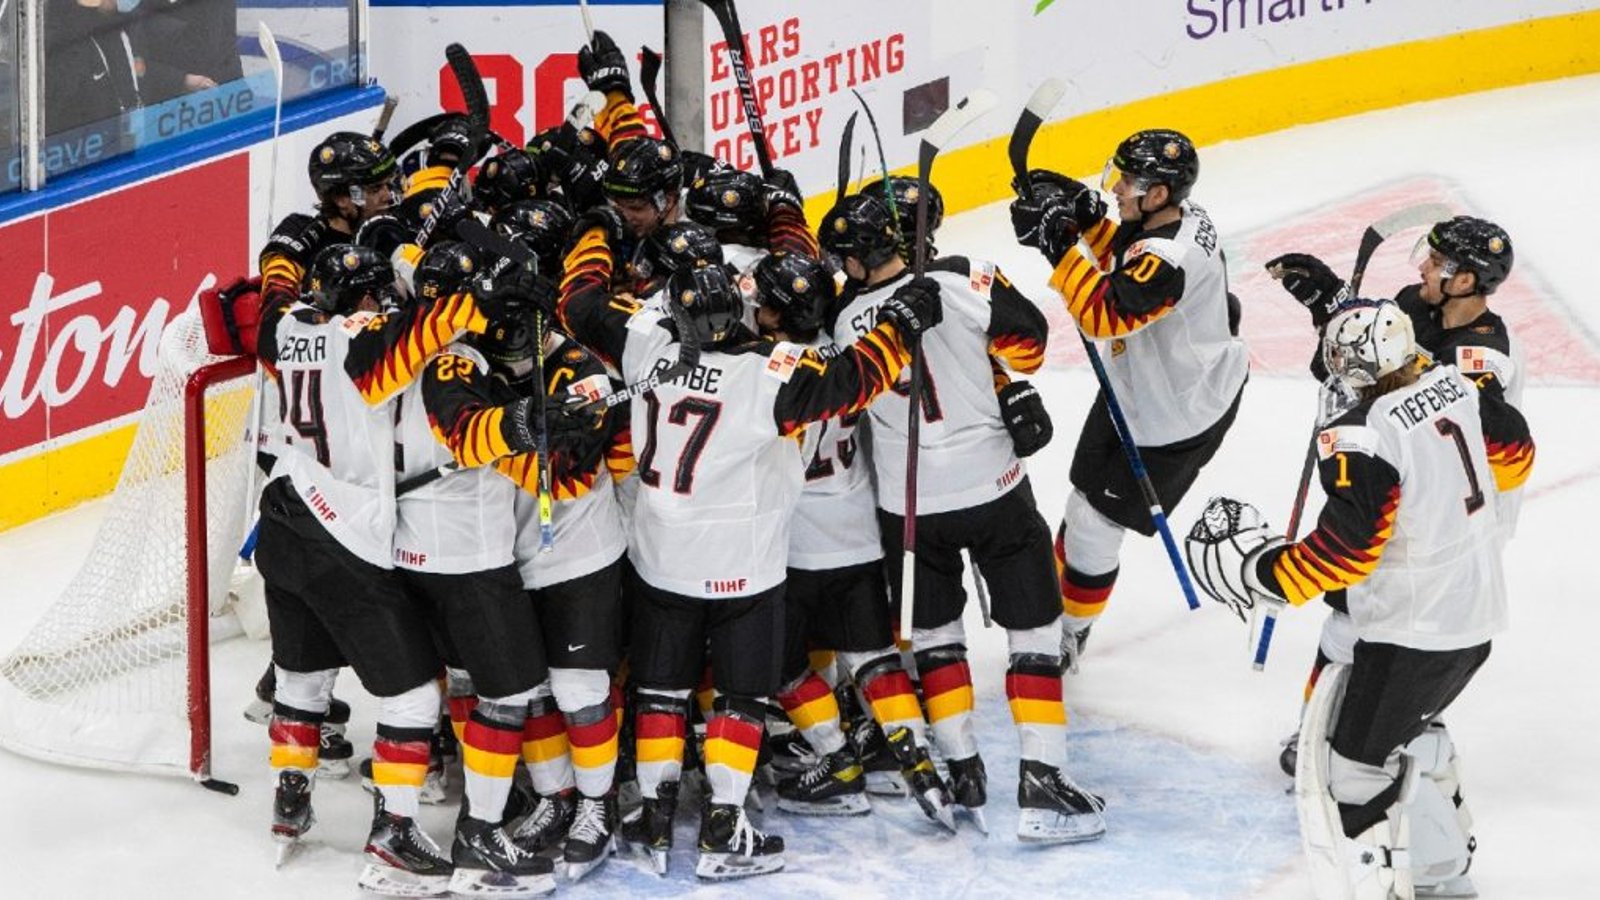 Team Germany players are praised for playing through adversity at the World Juniors!